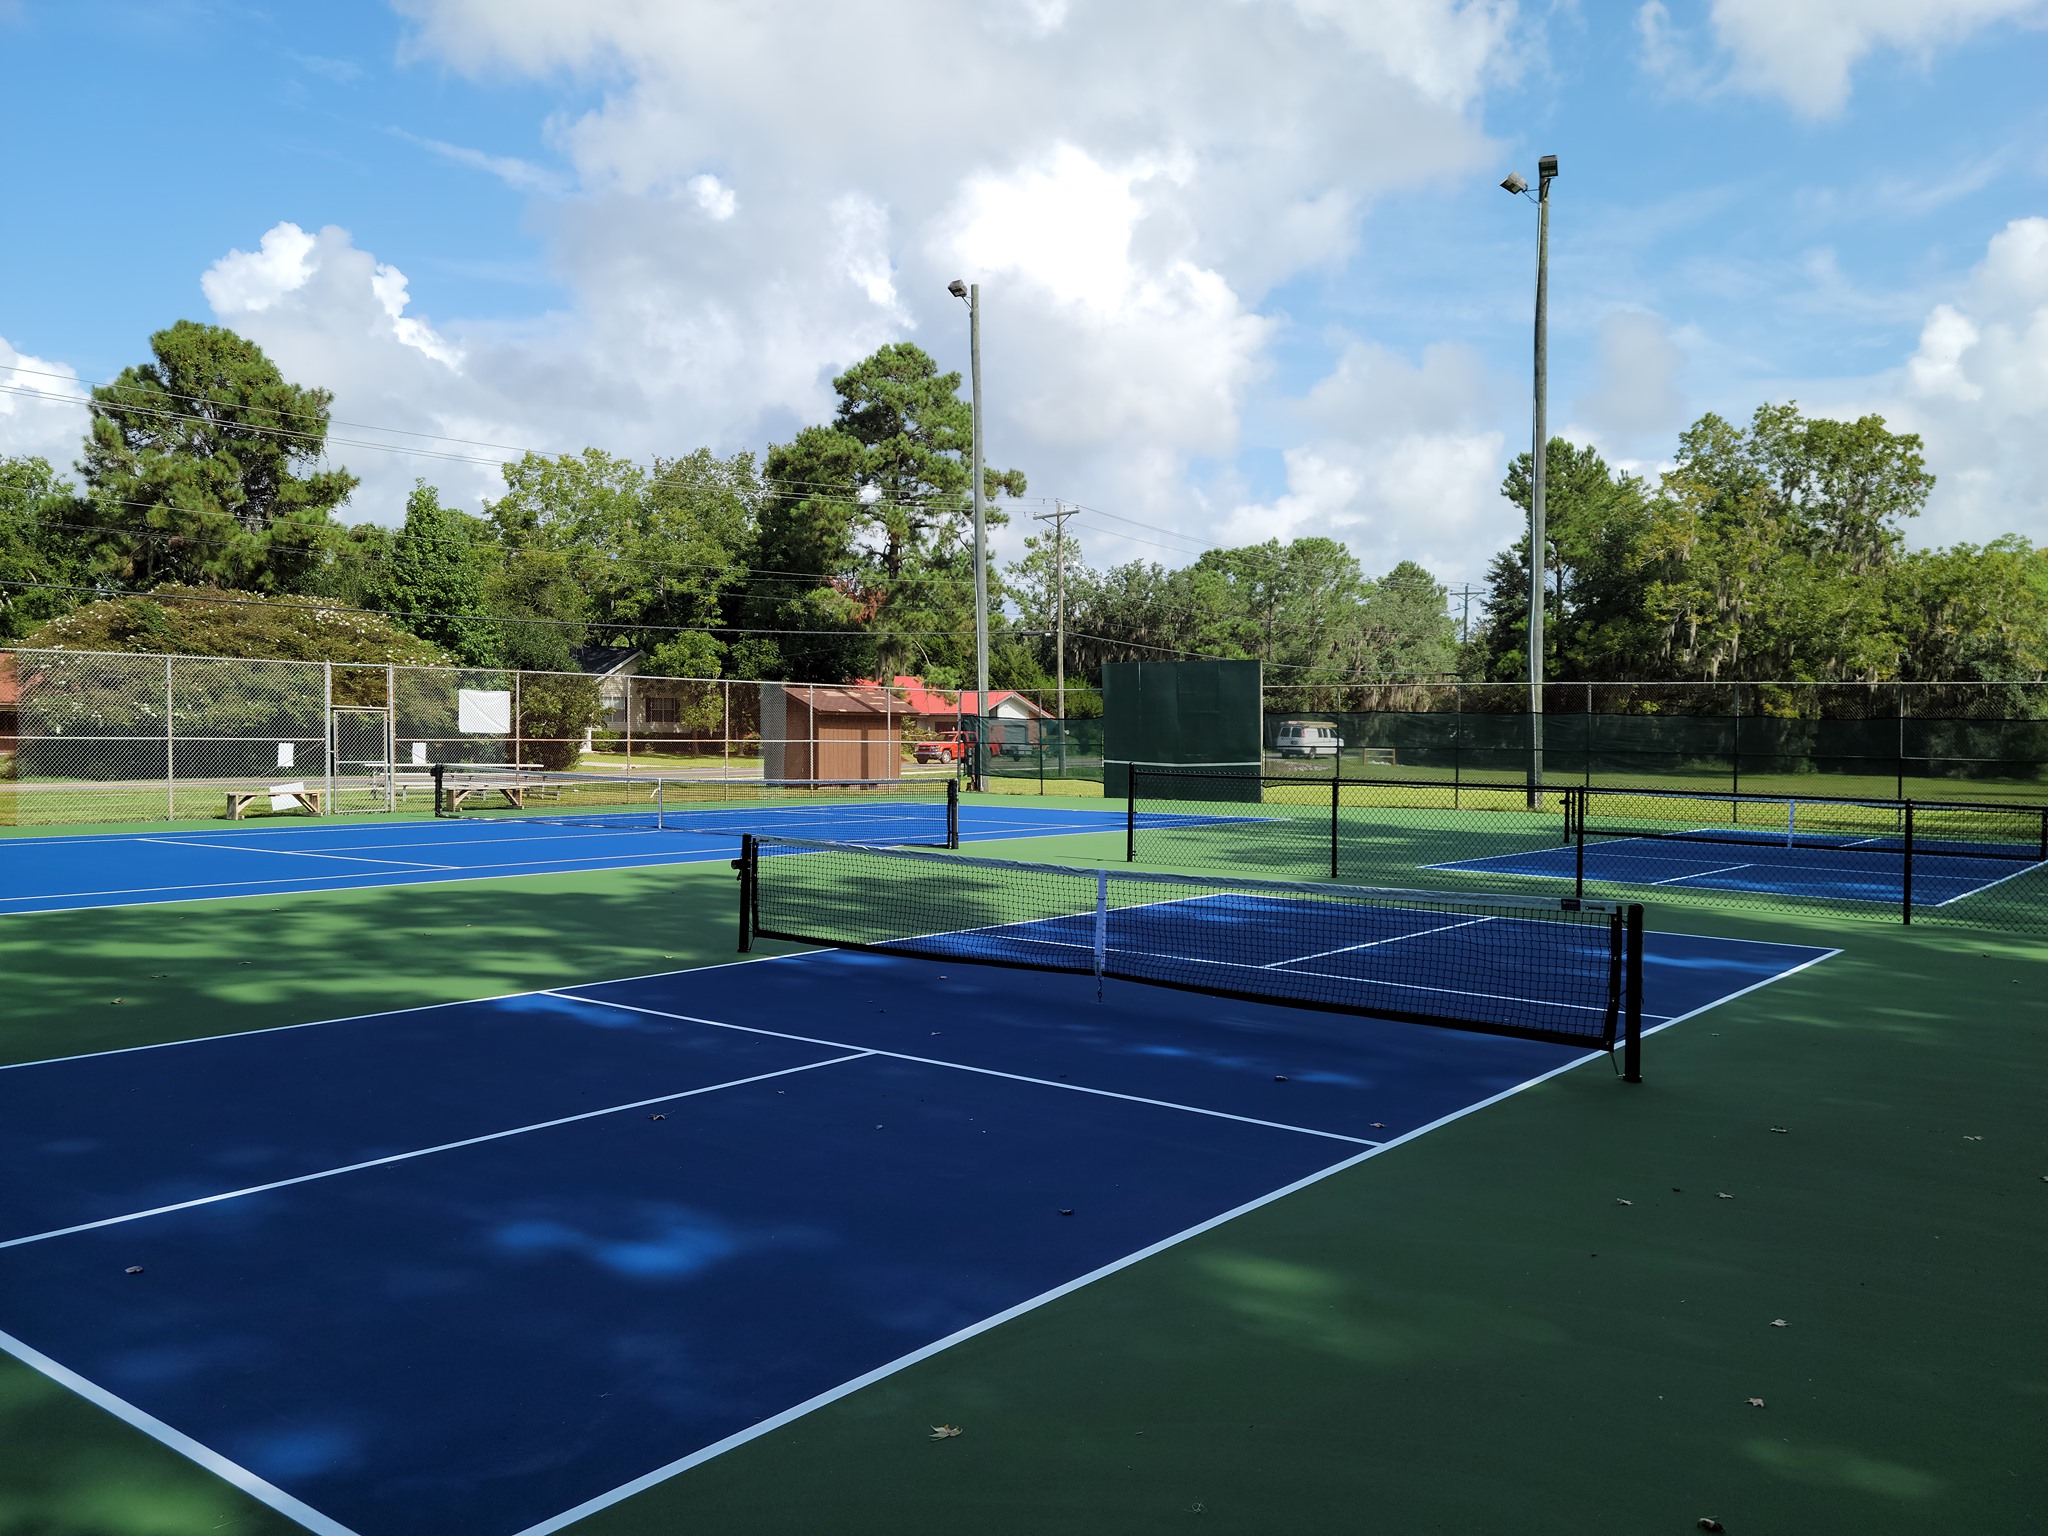 Grand Opening of County’s Newly Refurbished and Expanded  Pickleball Courts Tomorrow,  Wednesday, September 15